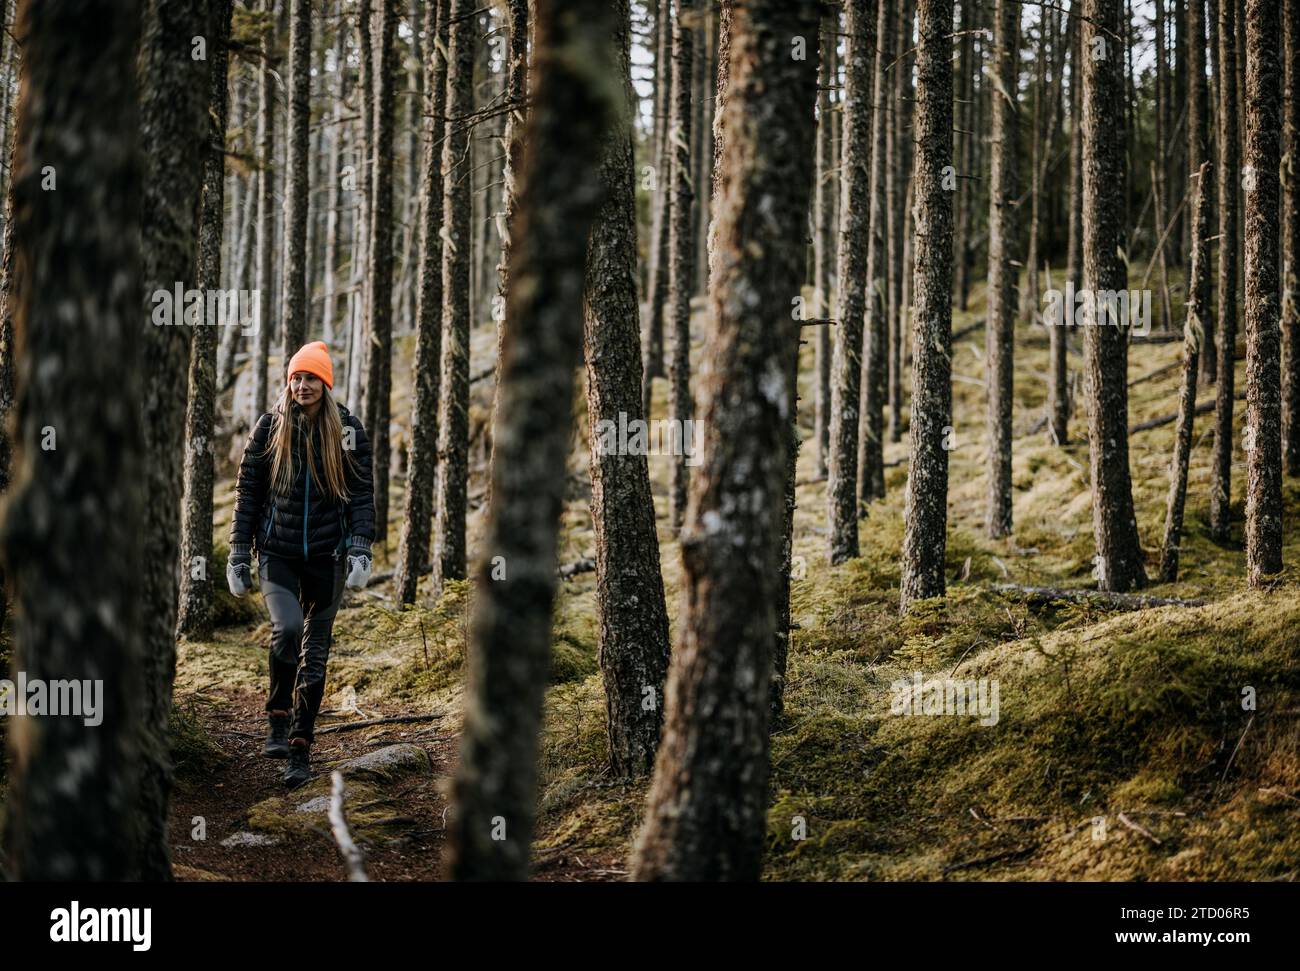 woman hikes through thick mossy forest, Stonington, Maine Stock Photo